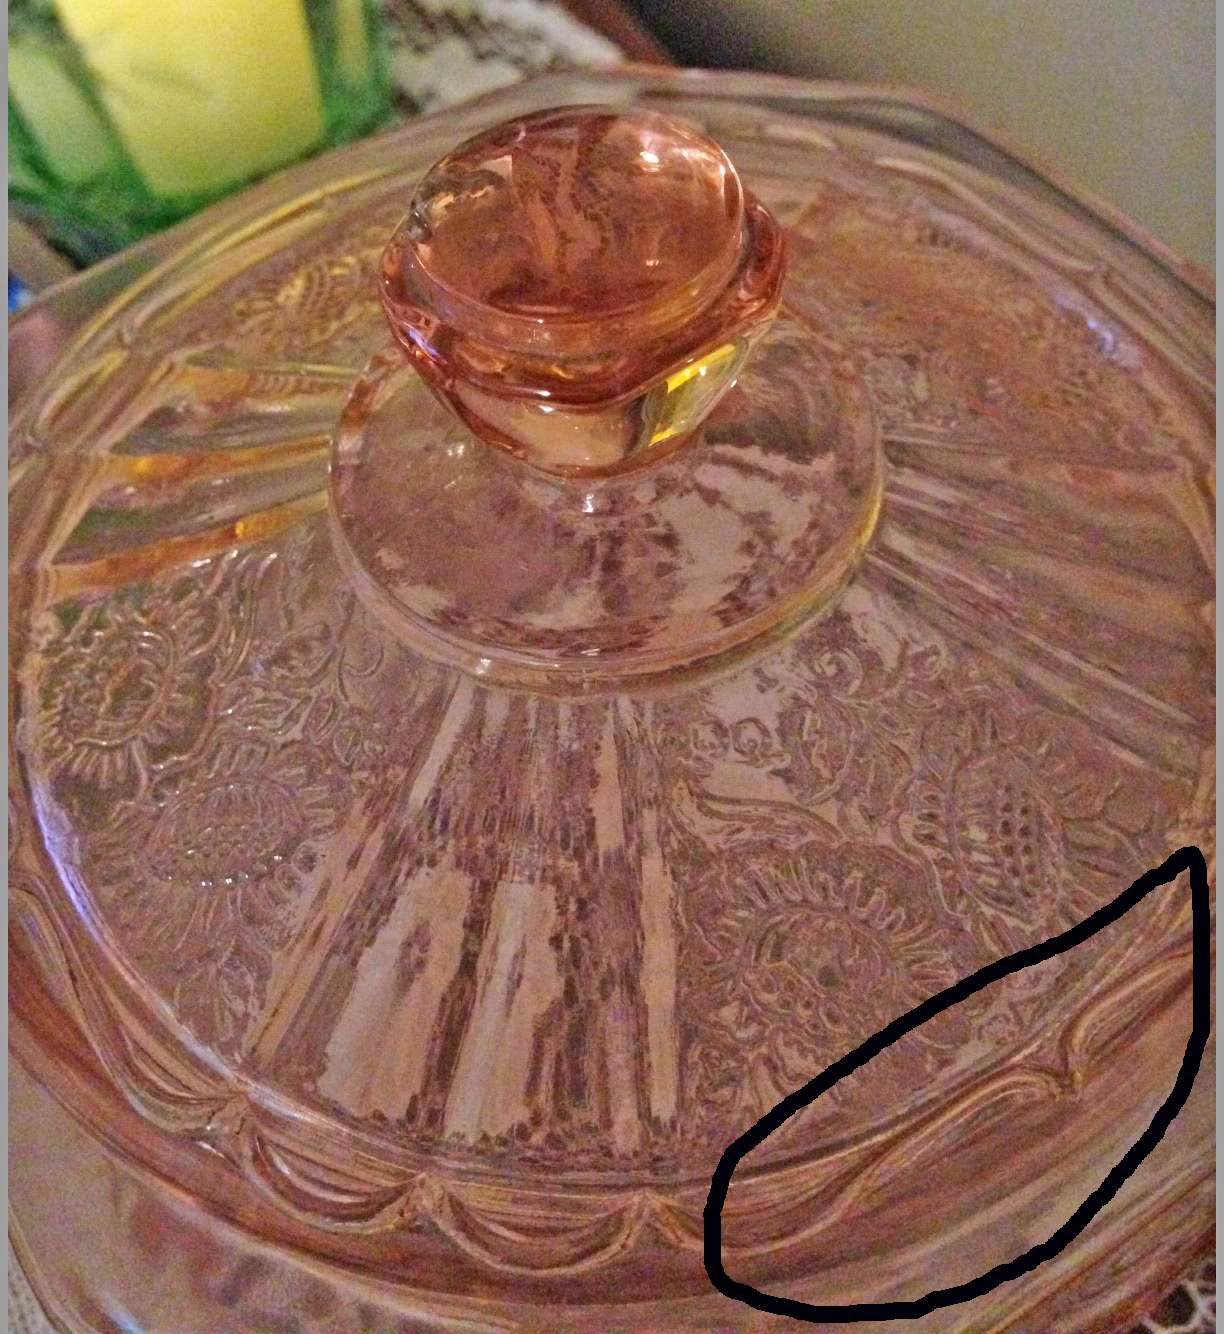 Authentic vs. Fake Mayfair Open Rose Pink Depression Glass ...